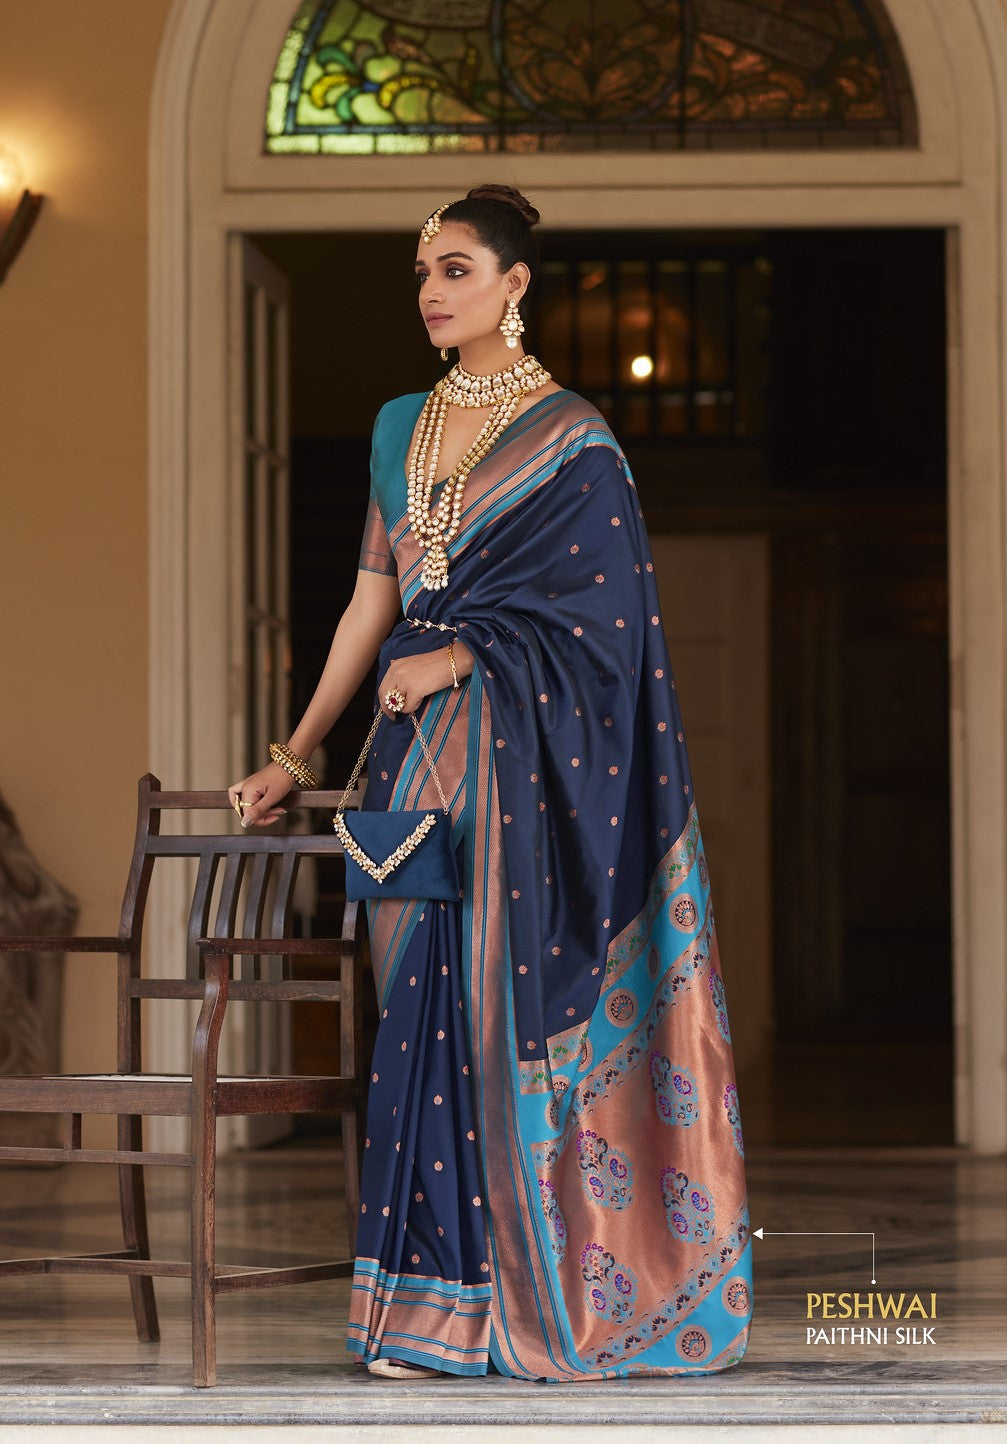 Buy Blue Paithani Sarees online in USA, CANADA and Australia from kotasilk.com